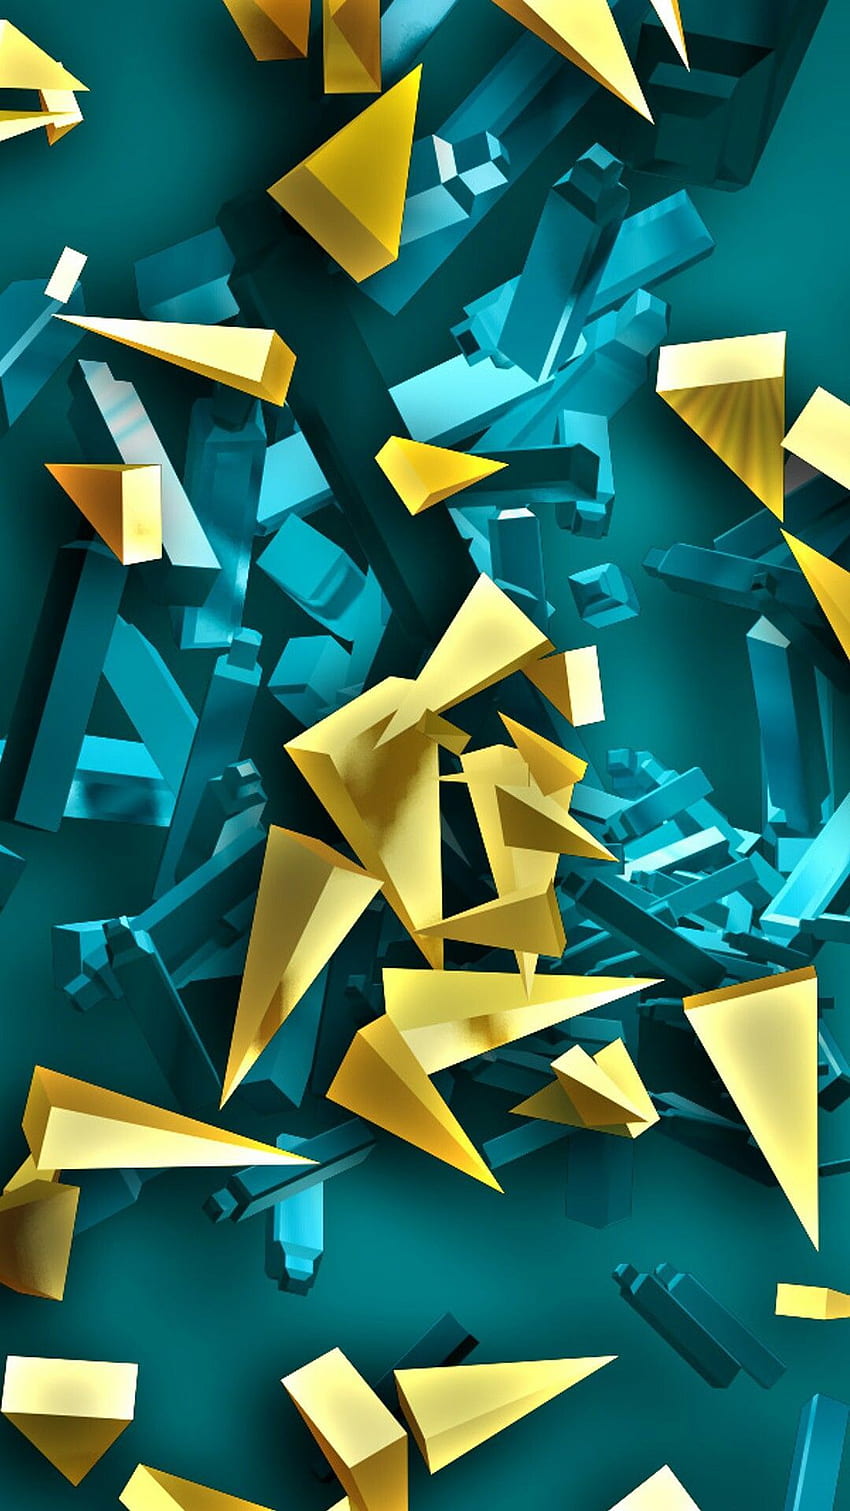 3D Abstract Structure Wallpaper 4k Ultra HD ID:3580